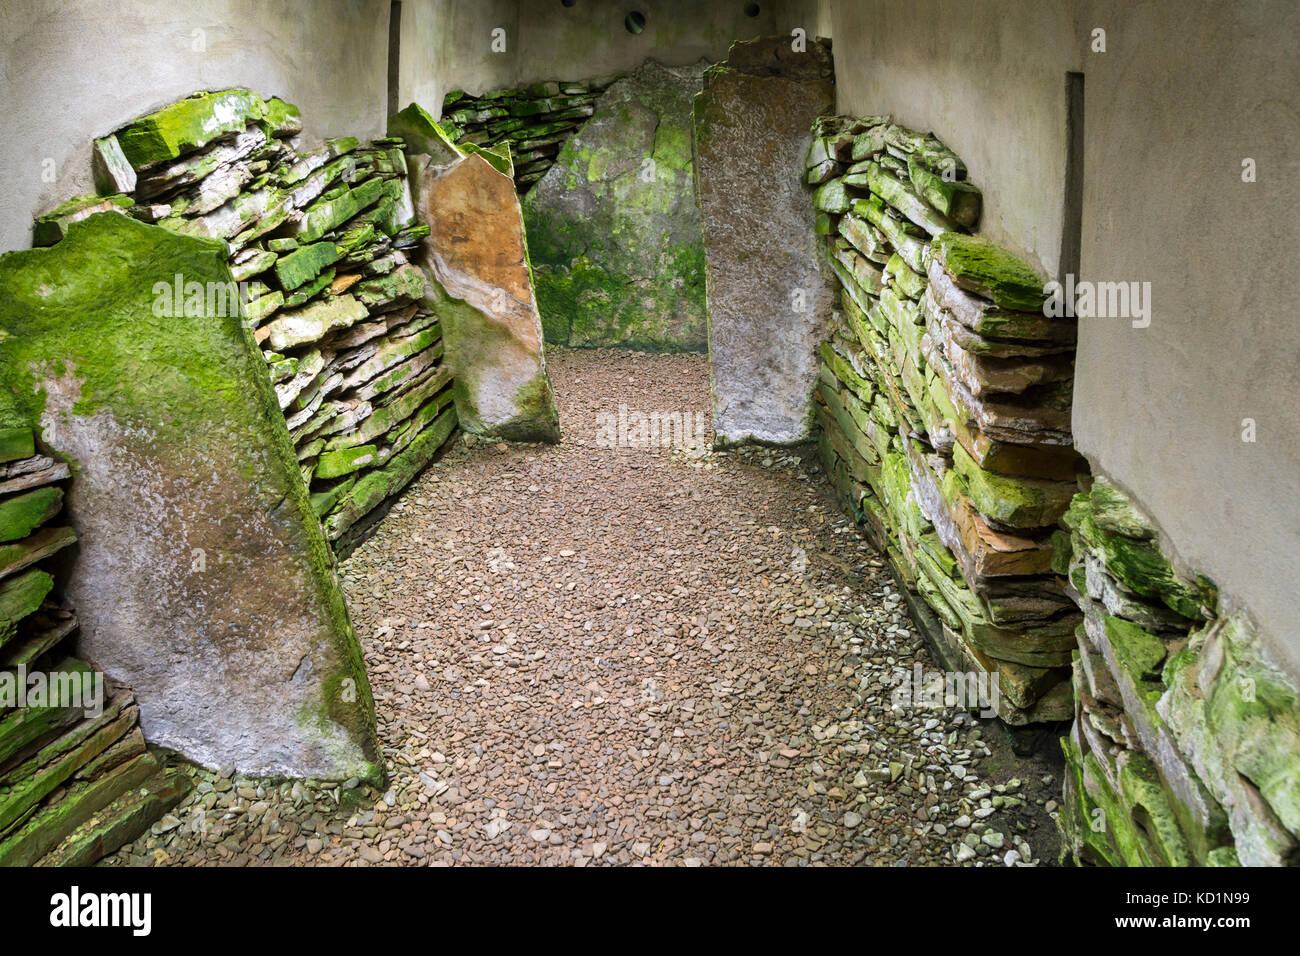 Blackhammer Chambered Cairn on the island of Rousay, Orkney Islands, Scotland, UK. Stock Photo